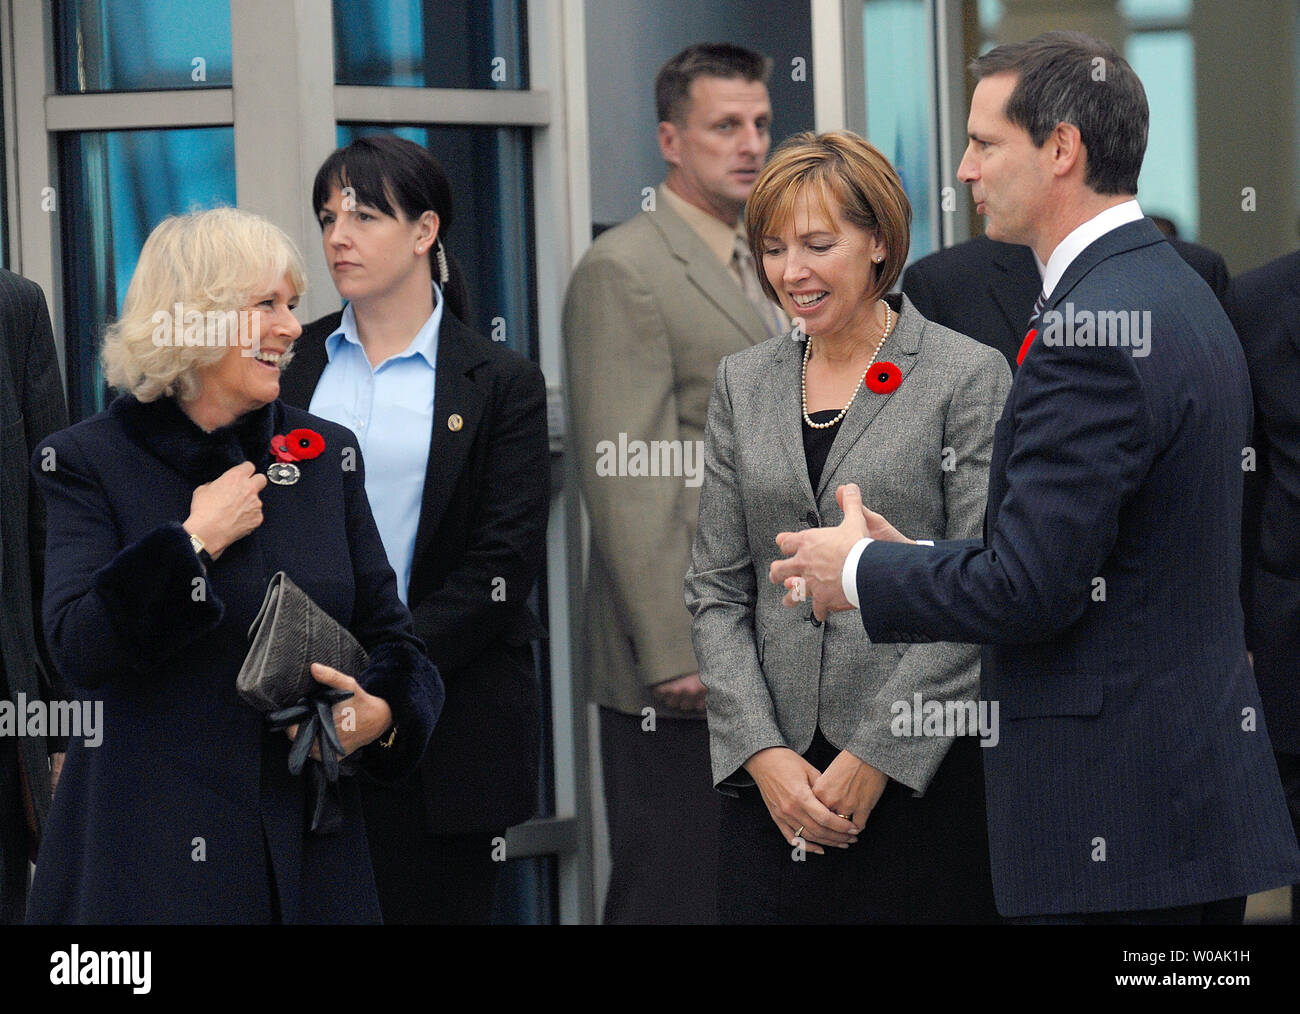 Camilla Parker Bowles, Duchess of Cornwall (L), chats with Ontario premier Dalton McGuinty (R) and his wife Terri at Pearson International Airport in Toronto, Canada on November 4, 2009.  The Duchess and her husband Prince Charles are on an 11-day tour of Canada.  UPI /Christine Chew Stock Photo